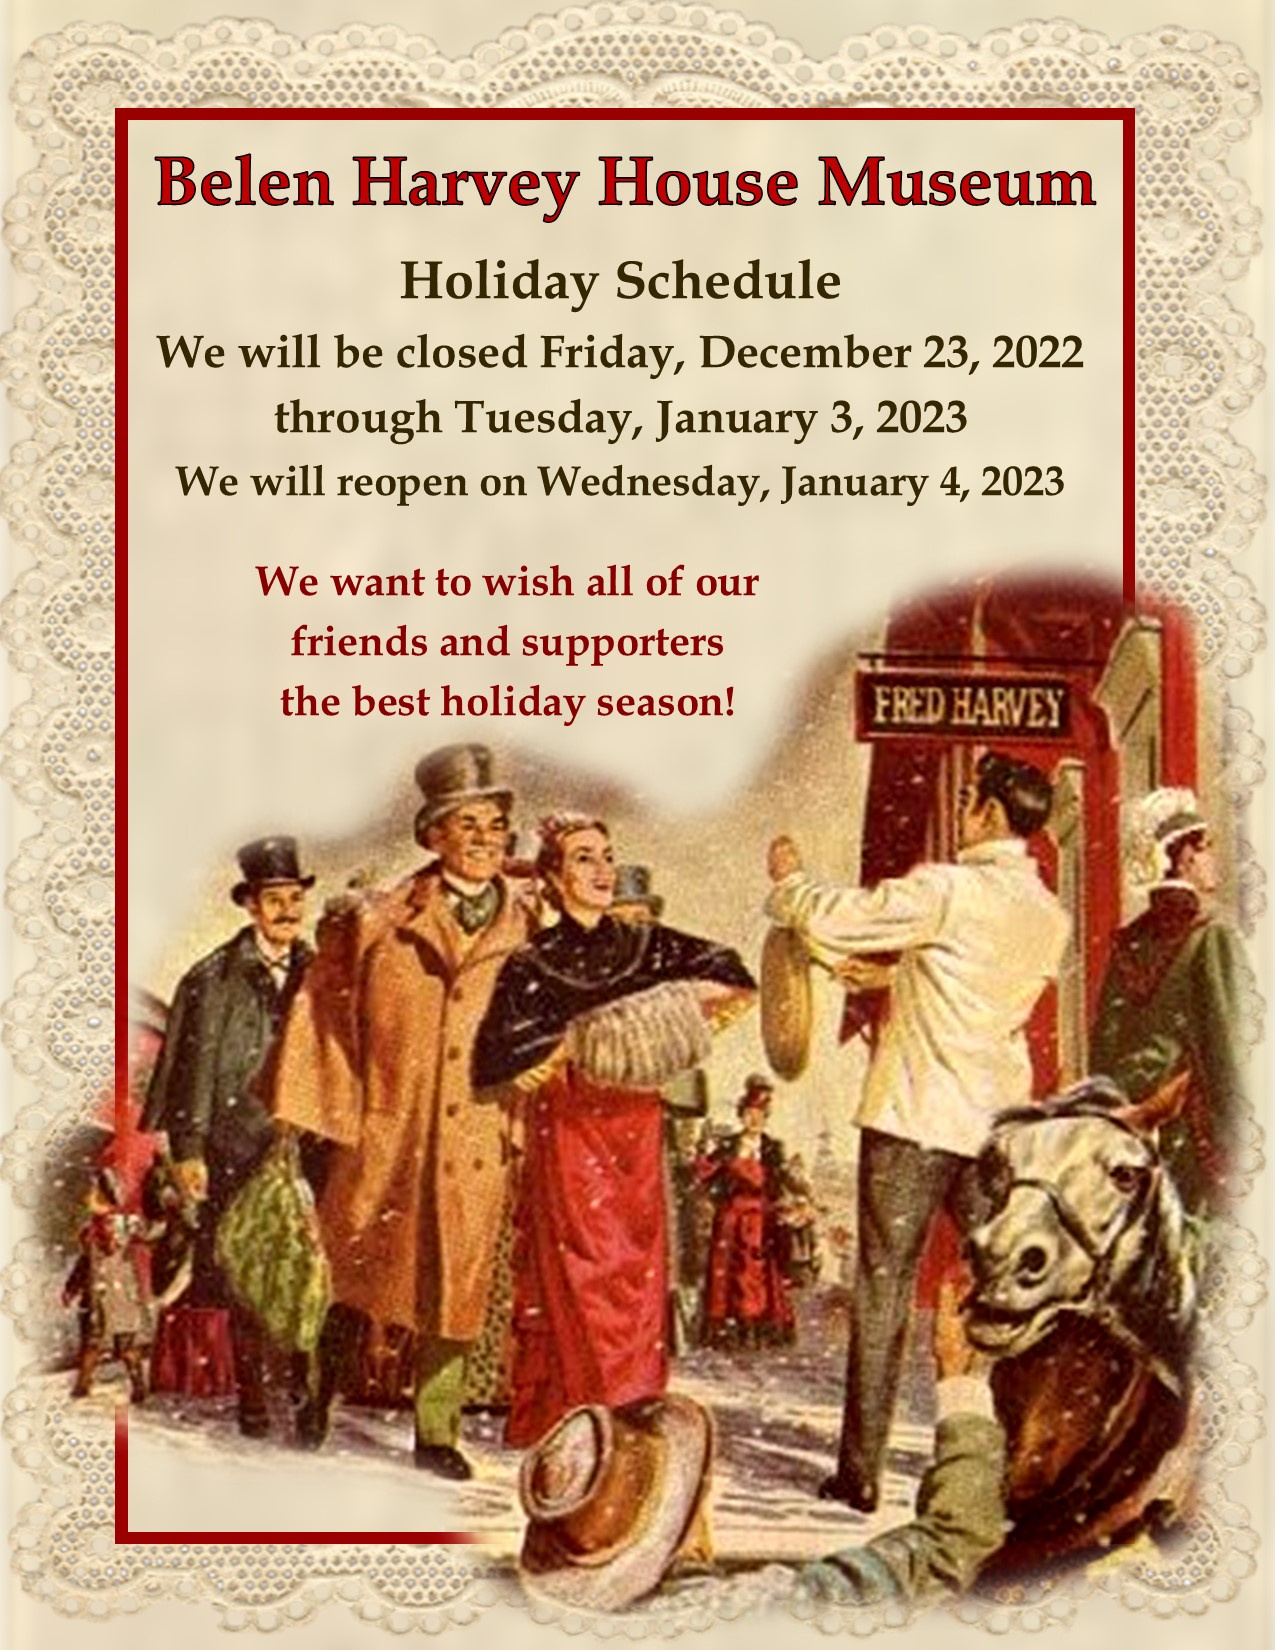 Featured image for “Belen Harvey House Museum Holiday Schedule”